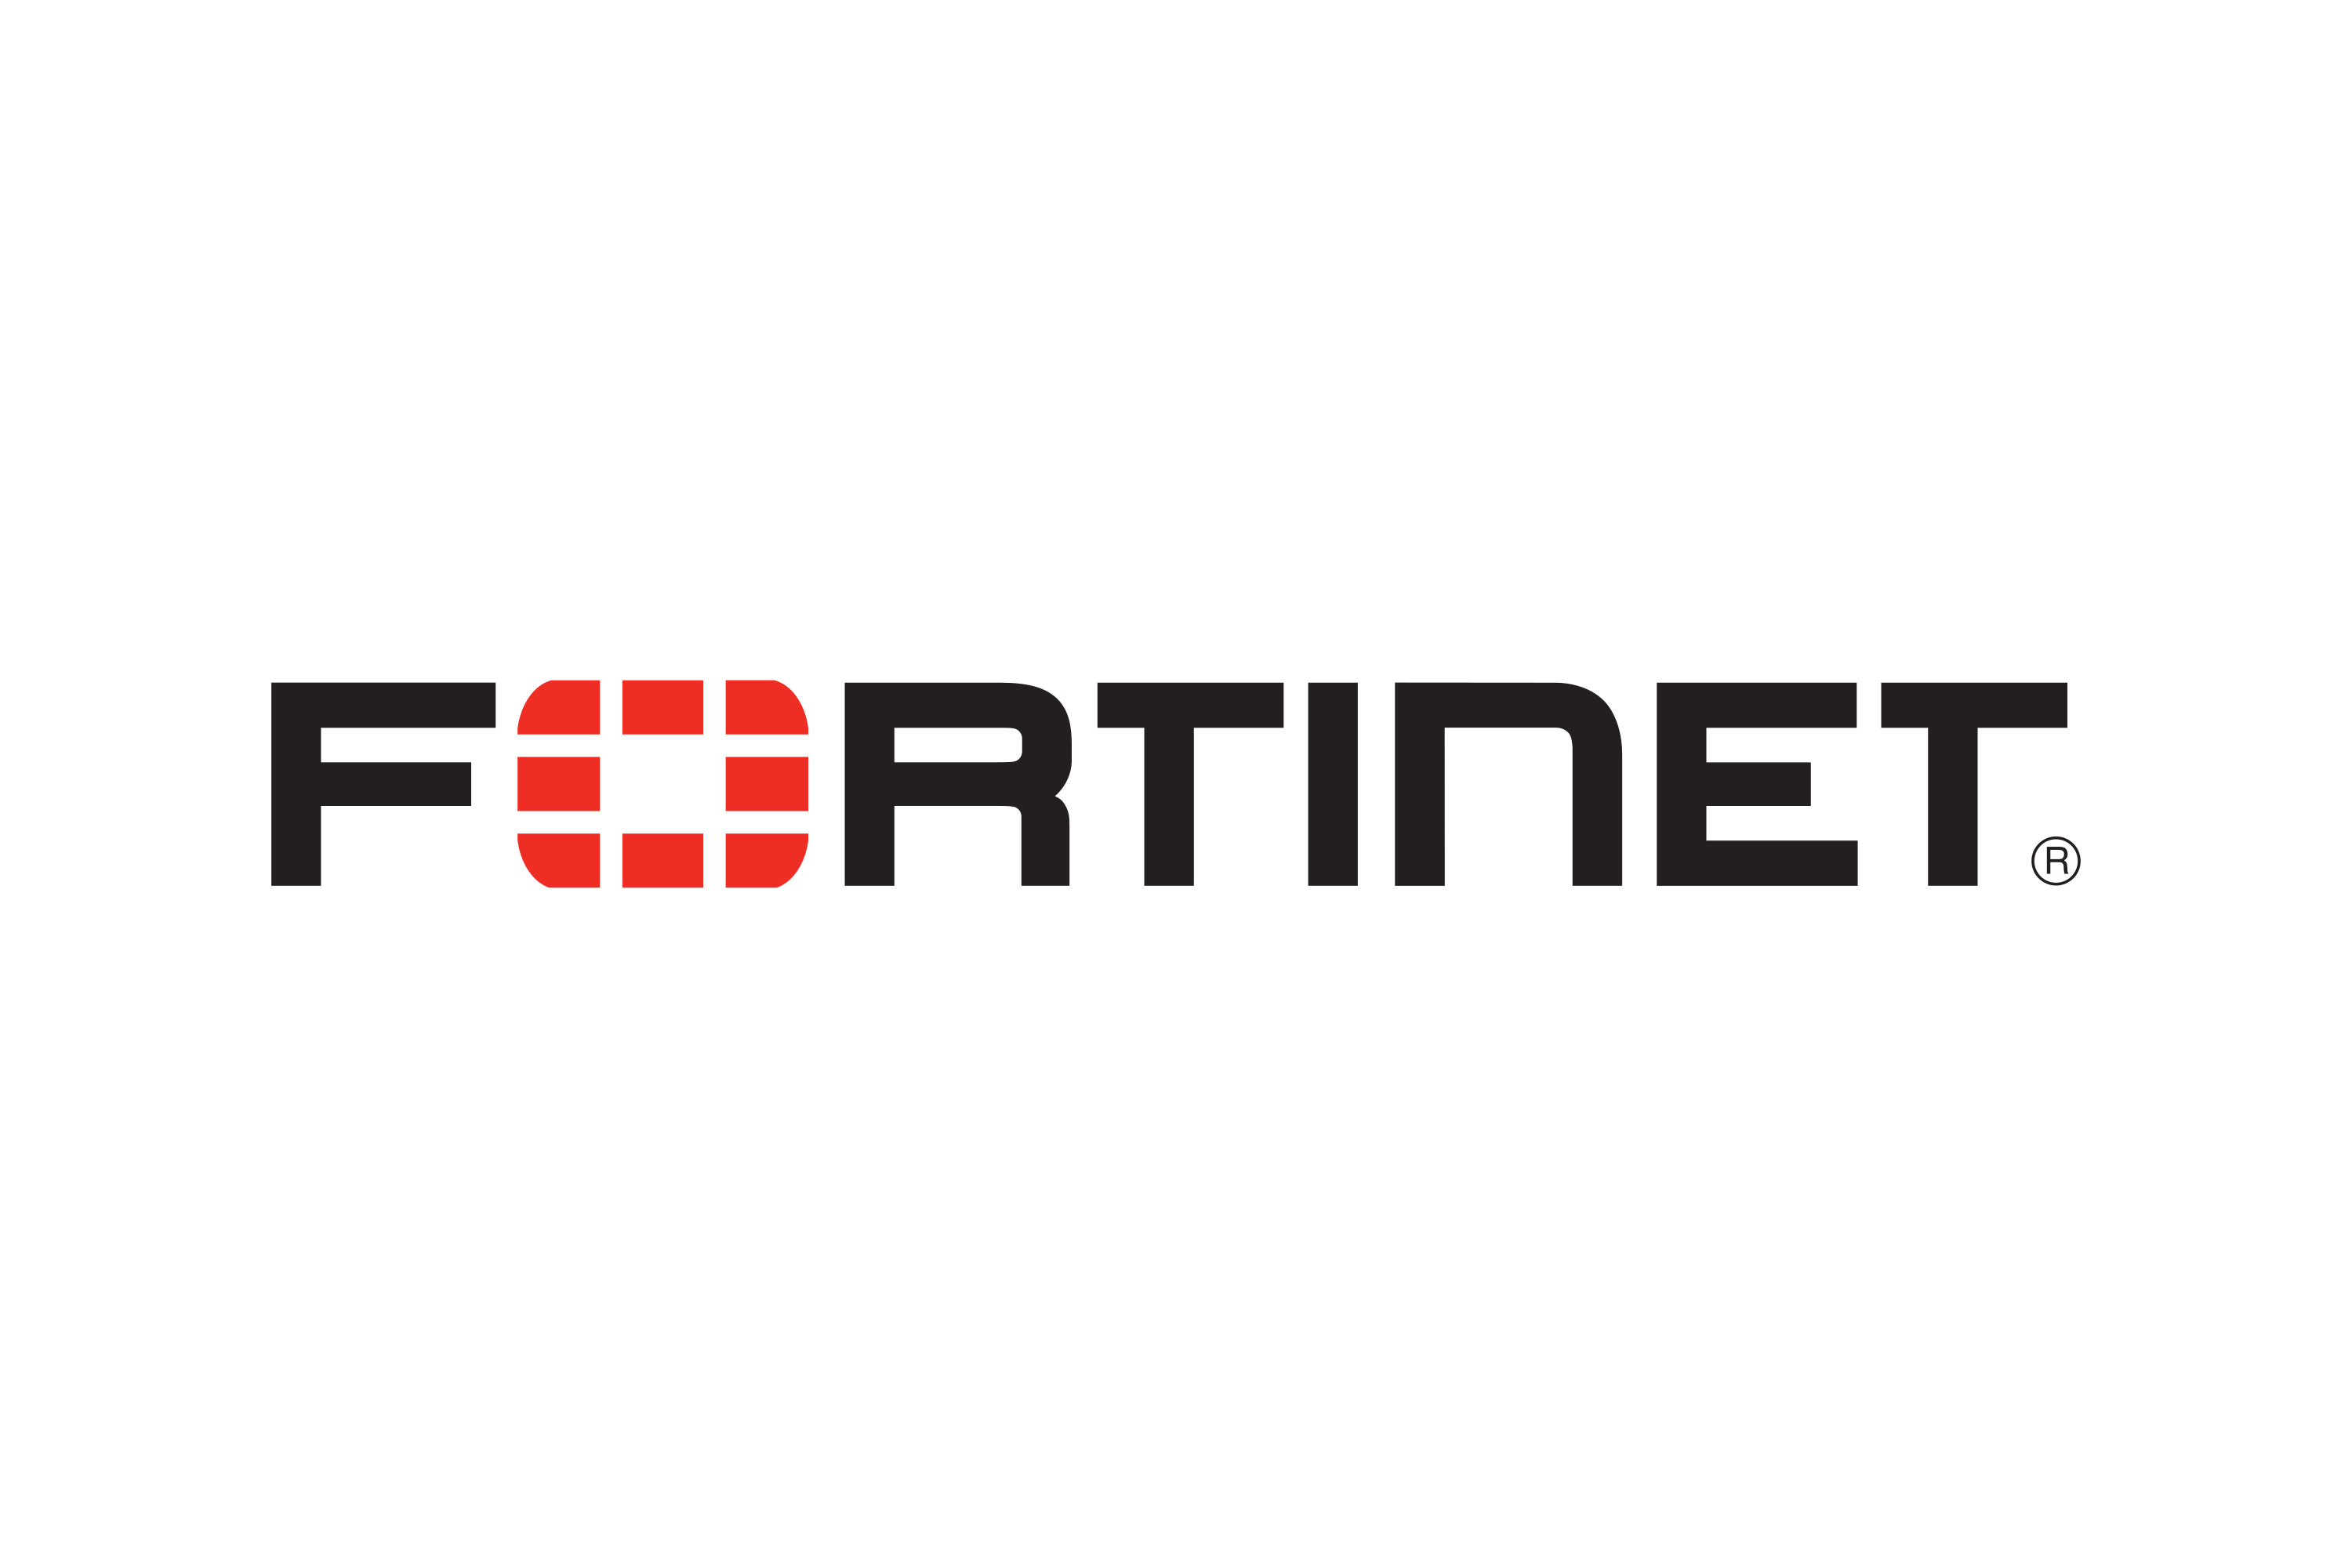 fortinet logo color